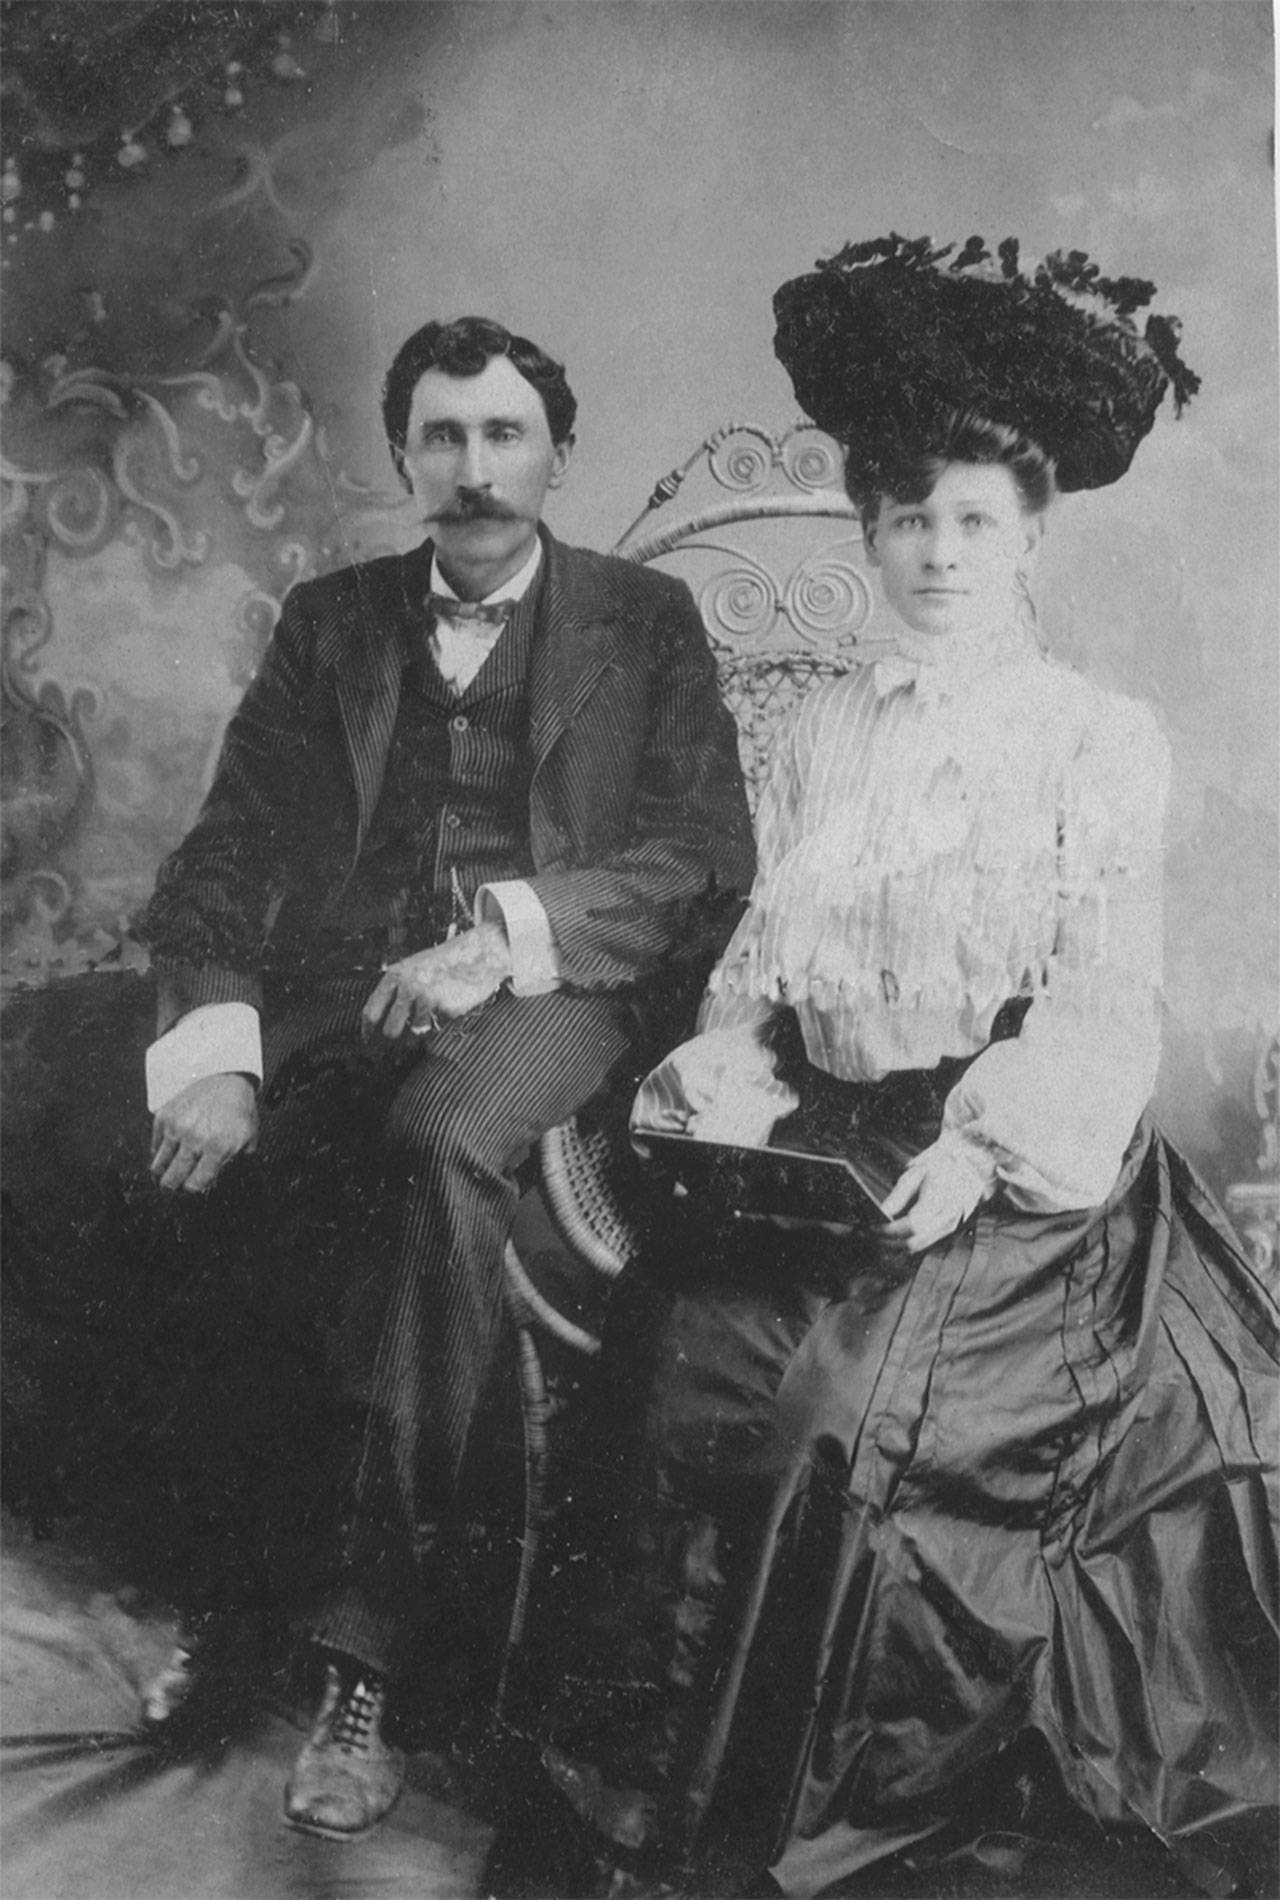 Harry and Lottie Dugas, whose Cosmopolis dairy farm was the site of the Sept. 15, 1920, murder of Aberdeen Special Agent Nicholas Koleski. (Dan and Jean Dugas Collection)